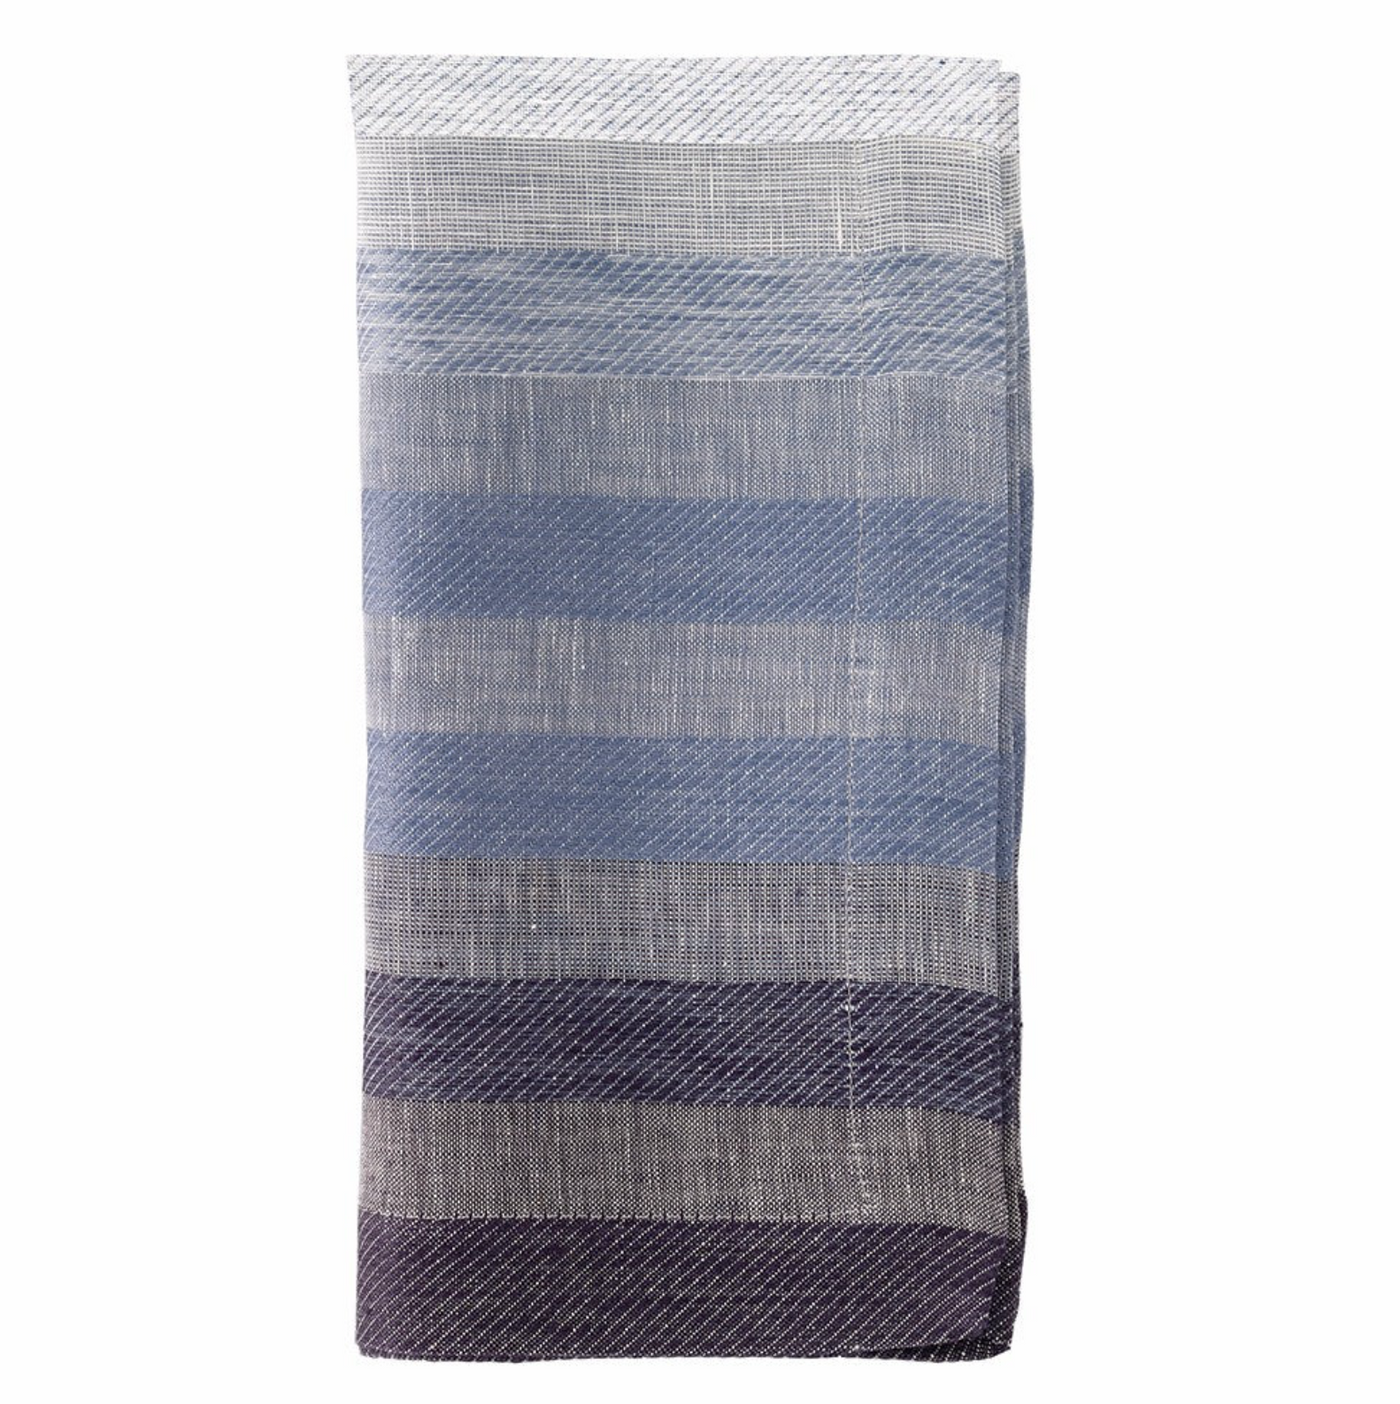 NAPKIN GRADIENT STRIPE (Available in 3 Colors)